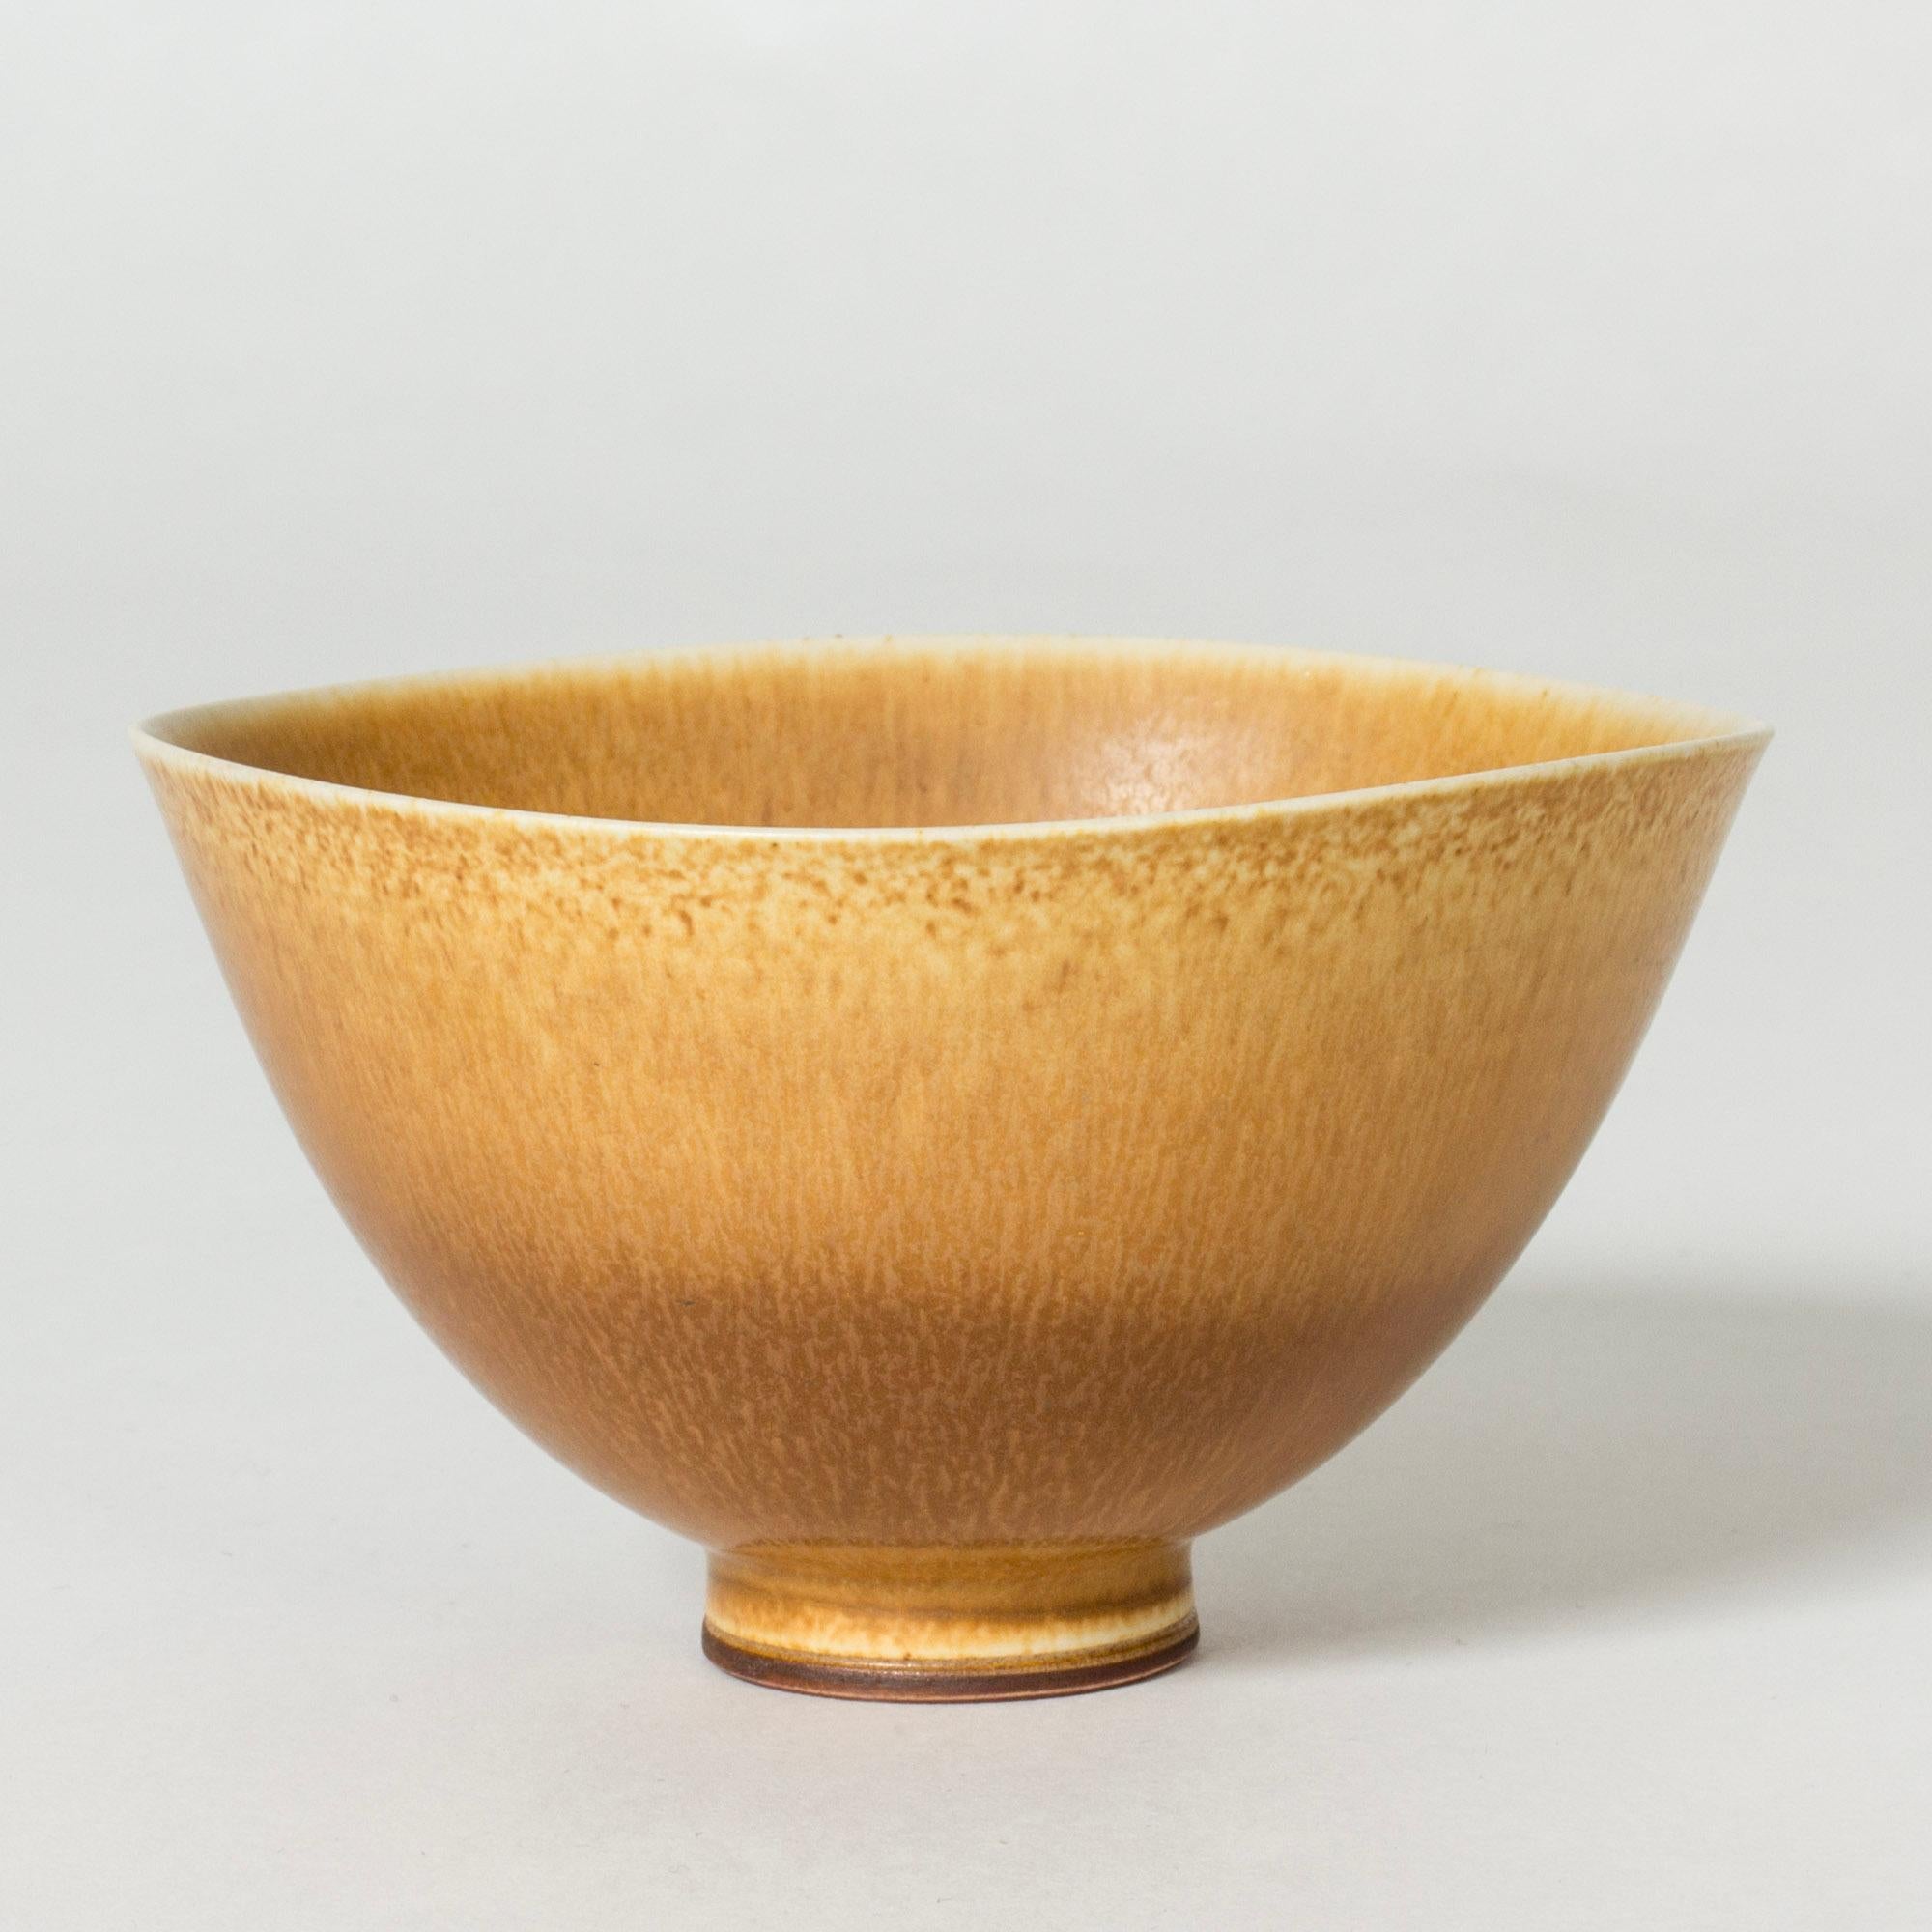 Lovely stoneware bowl by Berndt Friberg. Delicate, undulating edge. Caramel colored hare’s fur glaze, darker at the base, light at the top.

Berndt Friberg was a Swedish ceramicist, renowned for his stoneware vases and vessels for Gustavsberg. His